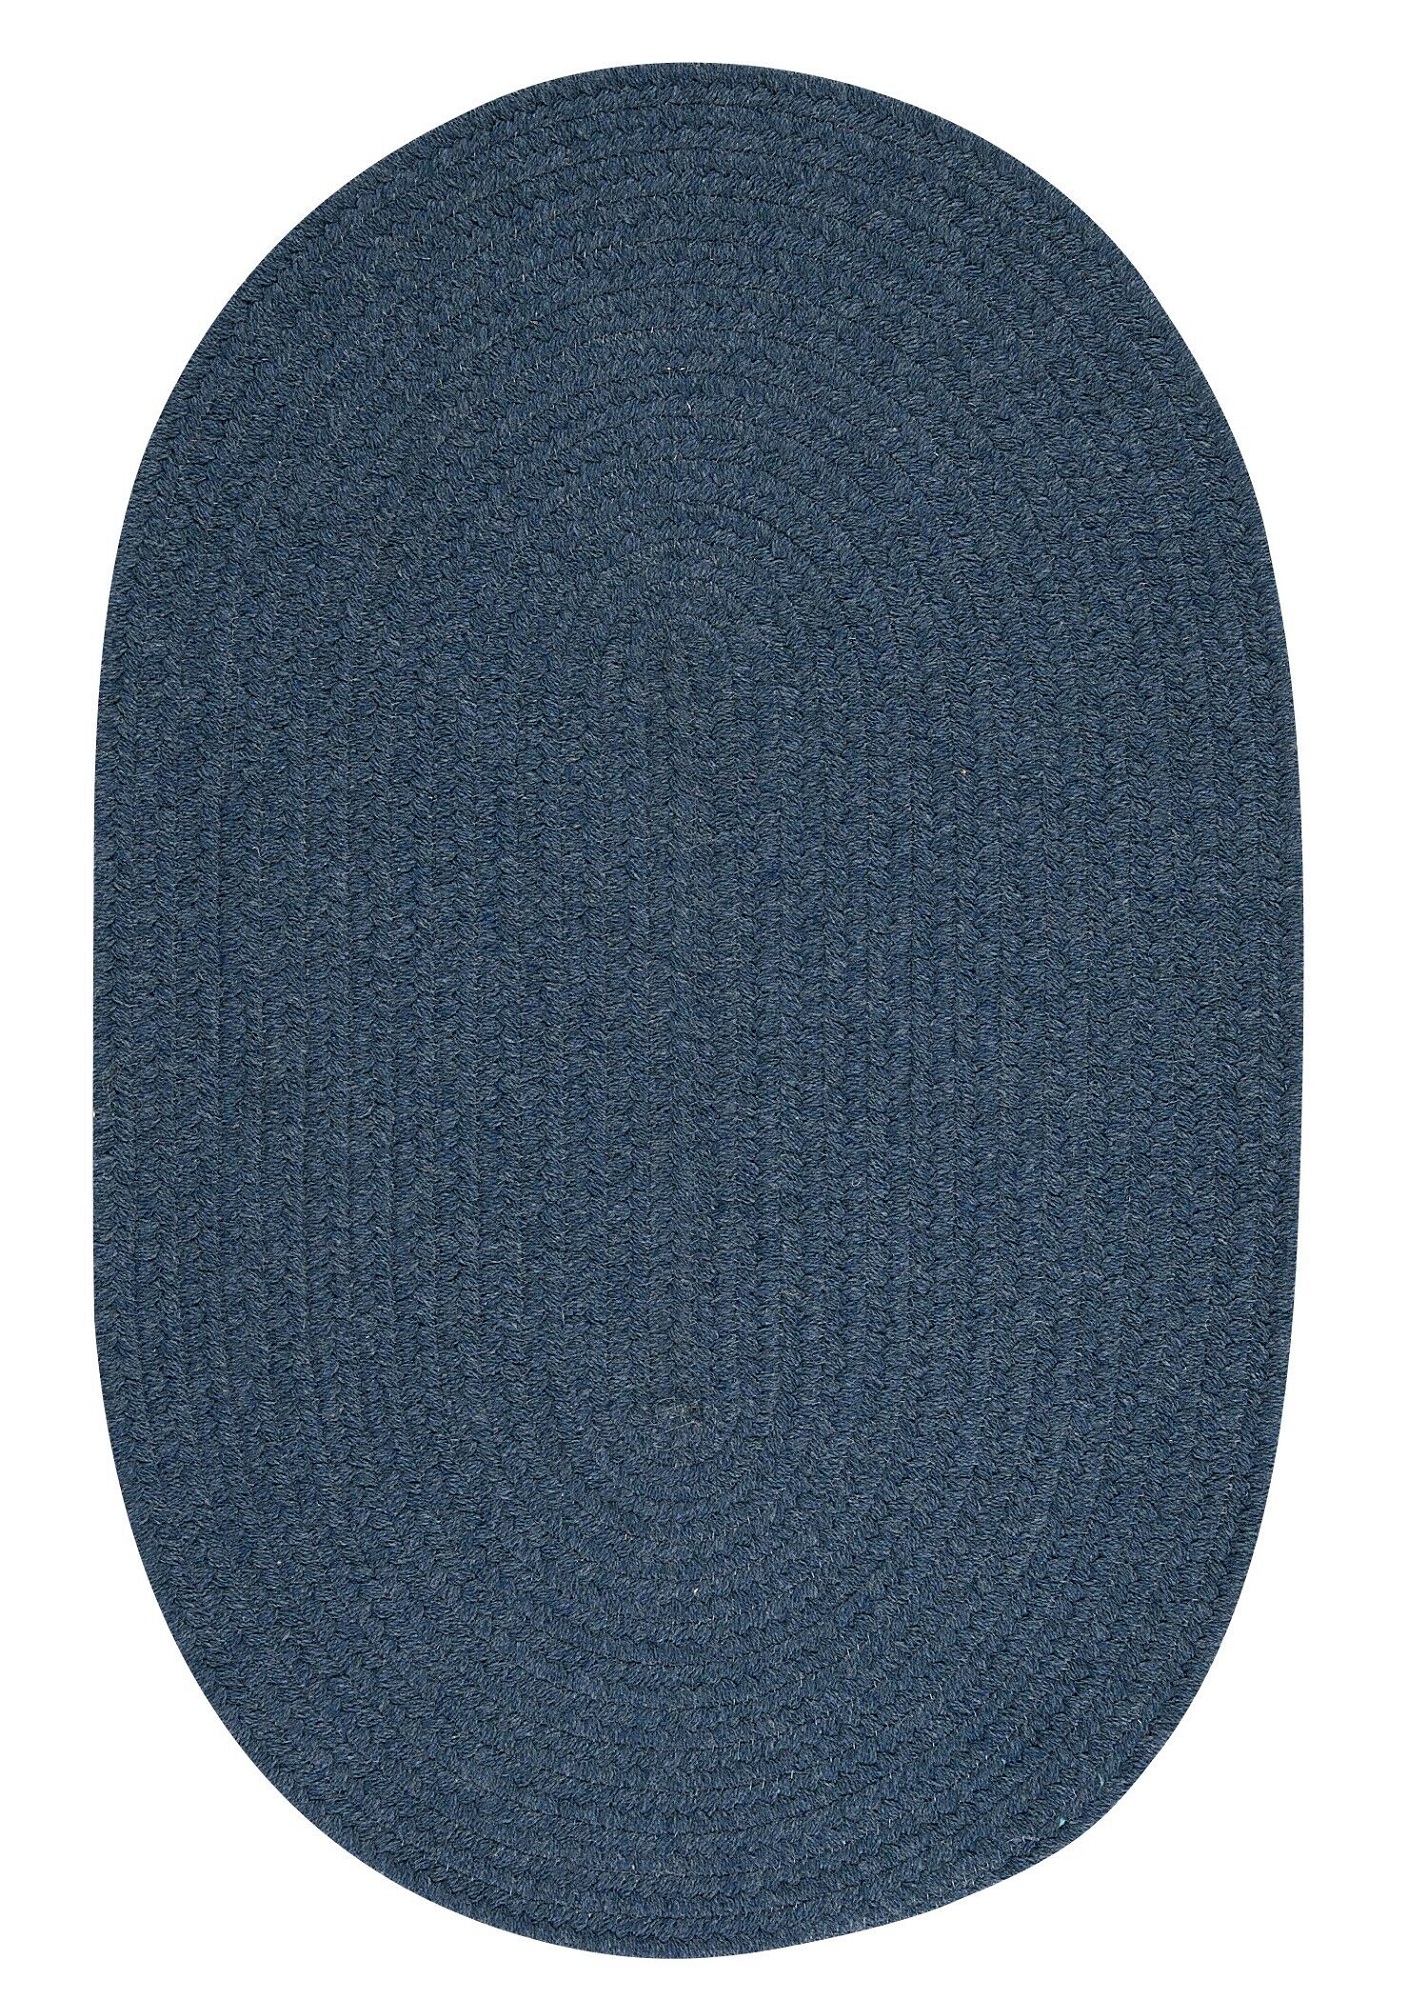 Colonial Mills 2' x 5' Blue Denim Reversible Oval Handcrafted Accent Area Rug